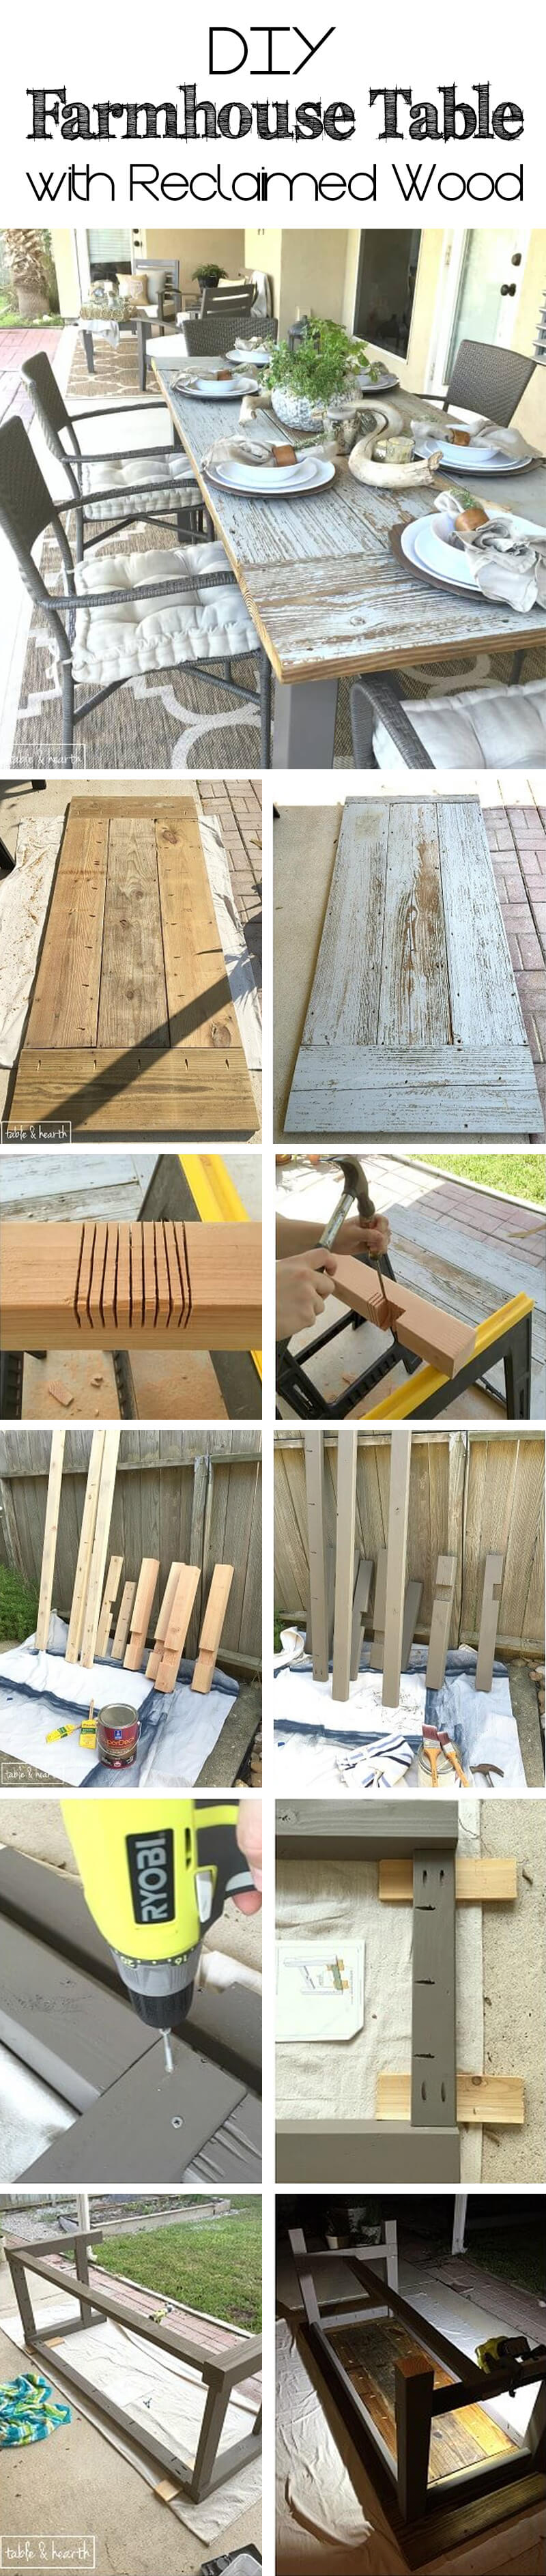 Rustic DIY Farmhouse Tables with Reclaimed Wood